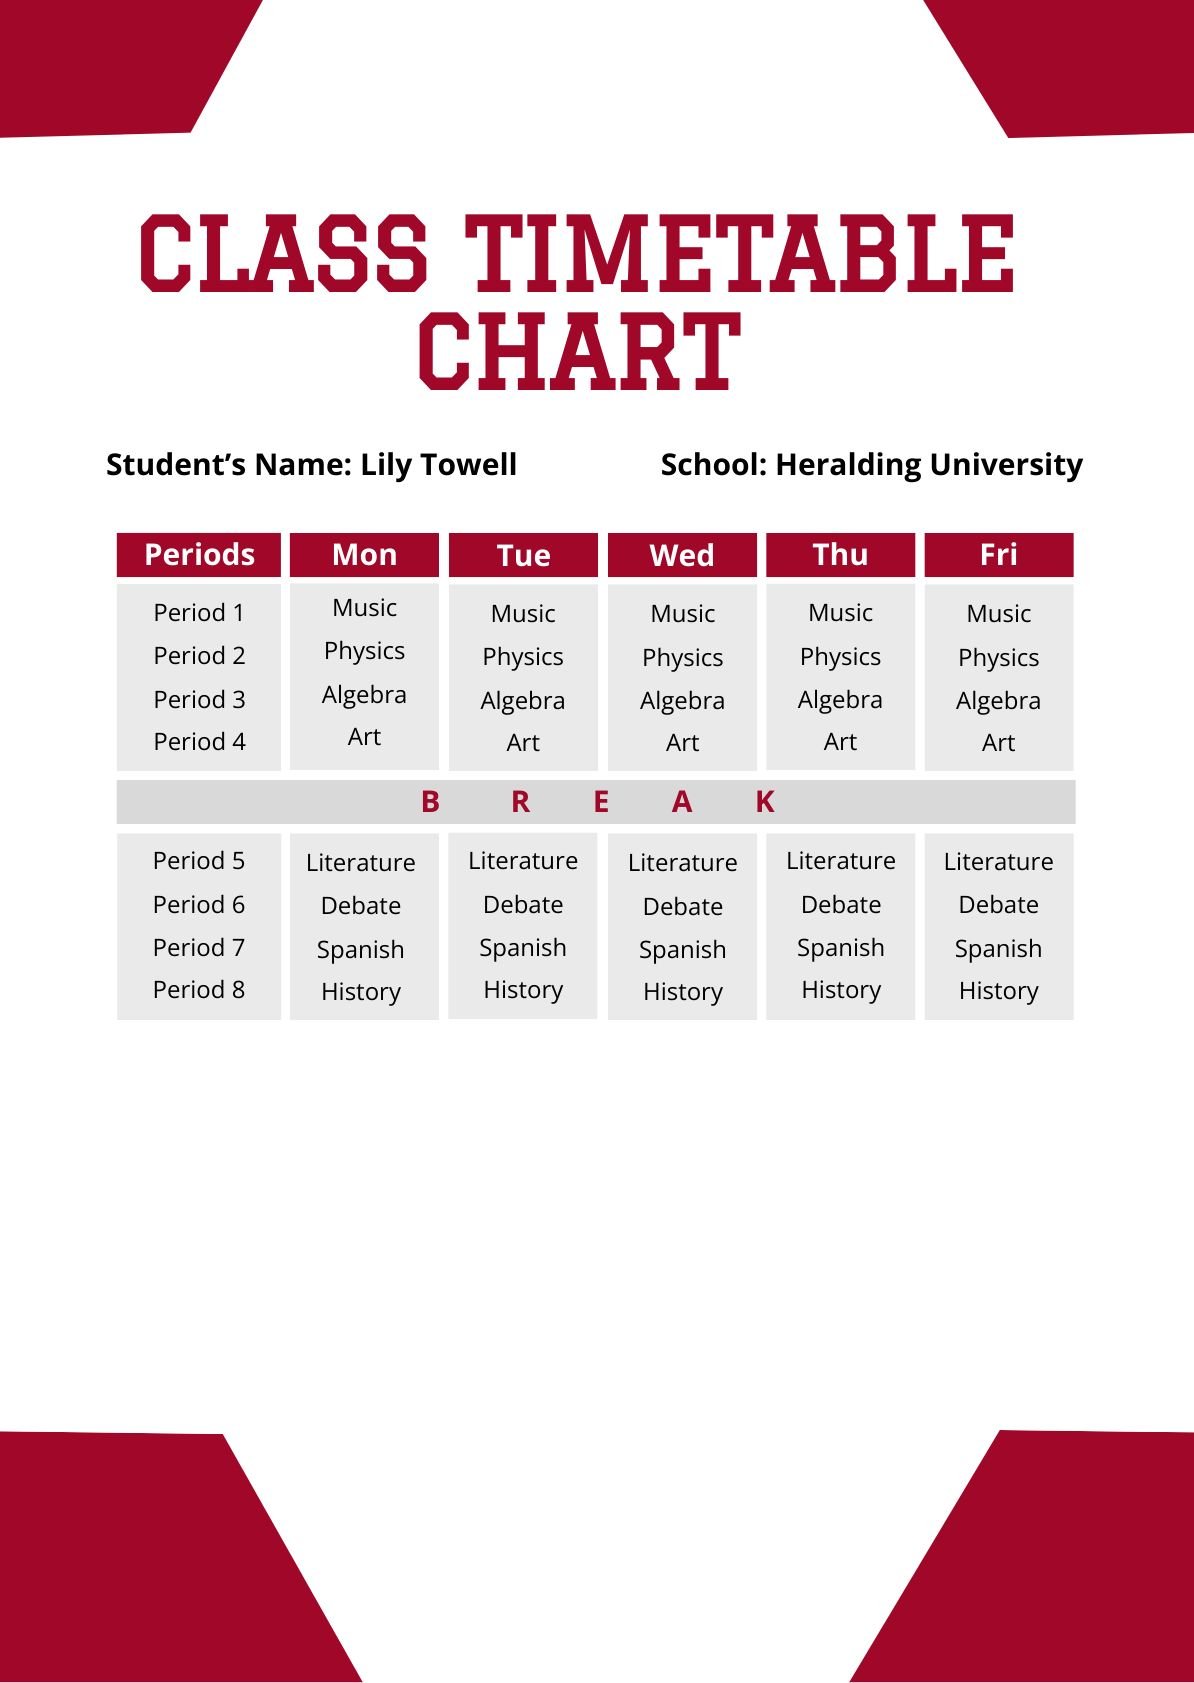 Free Class Timetable Chart